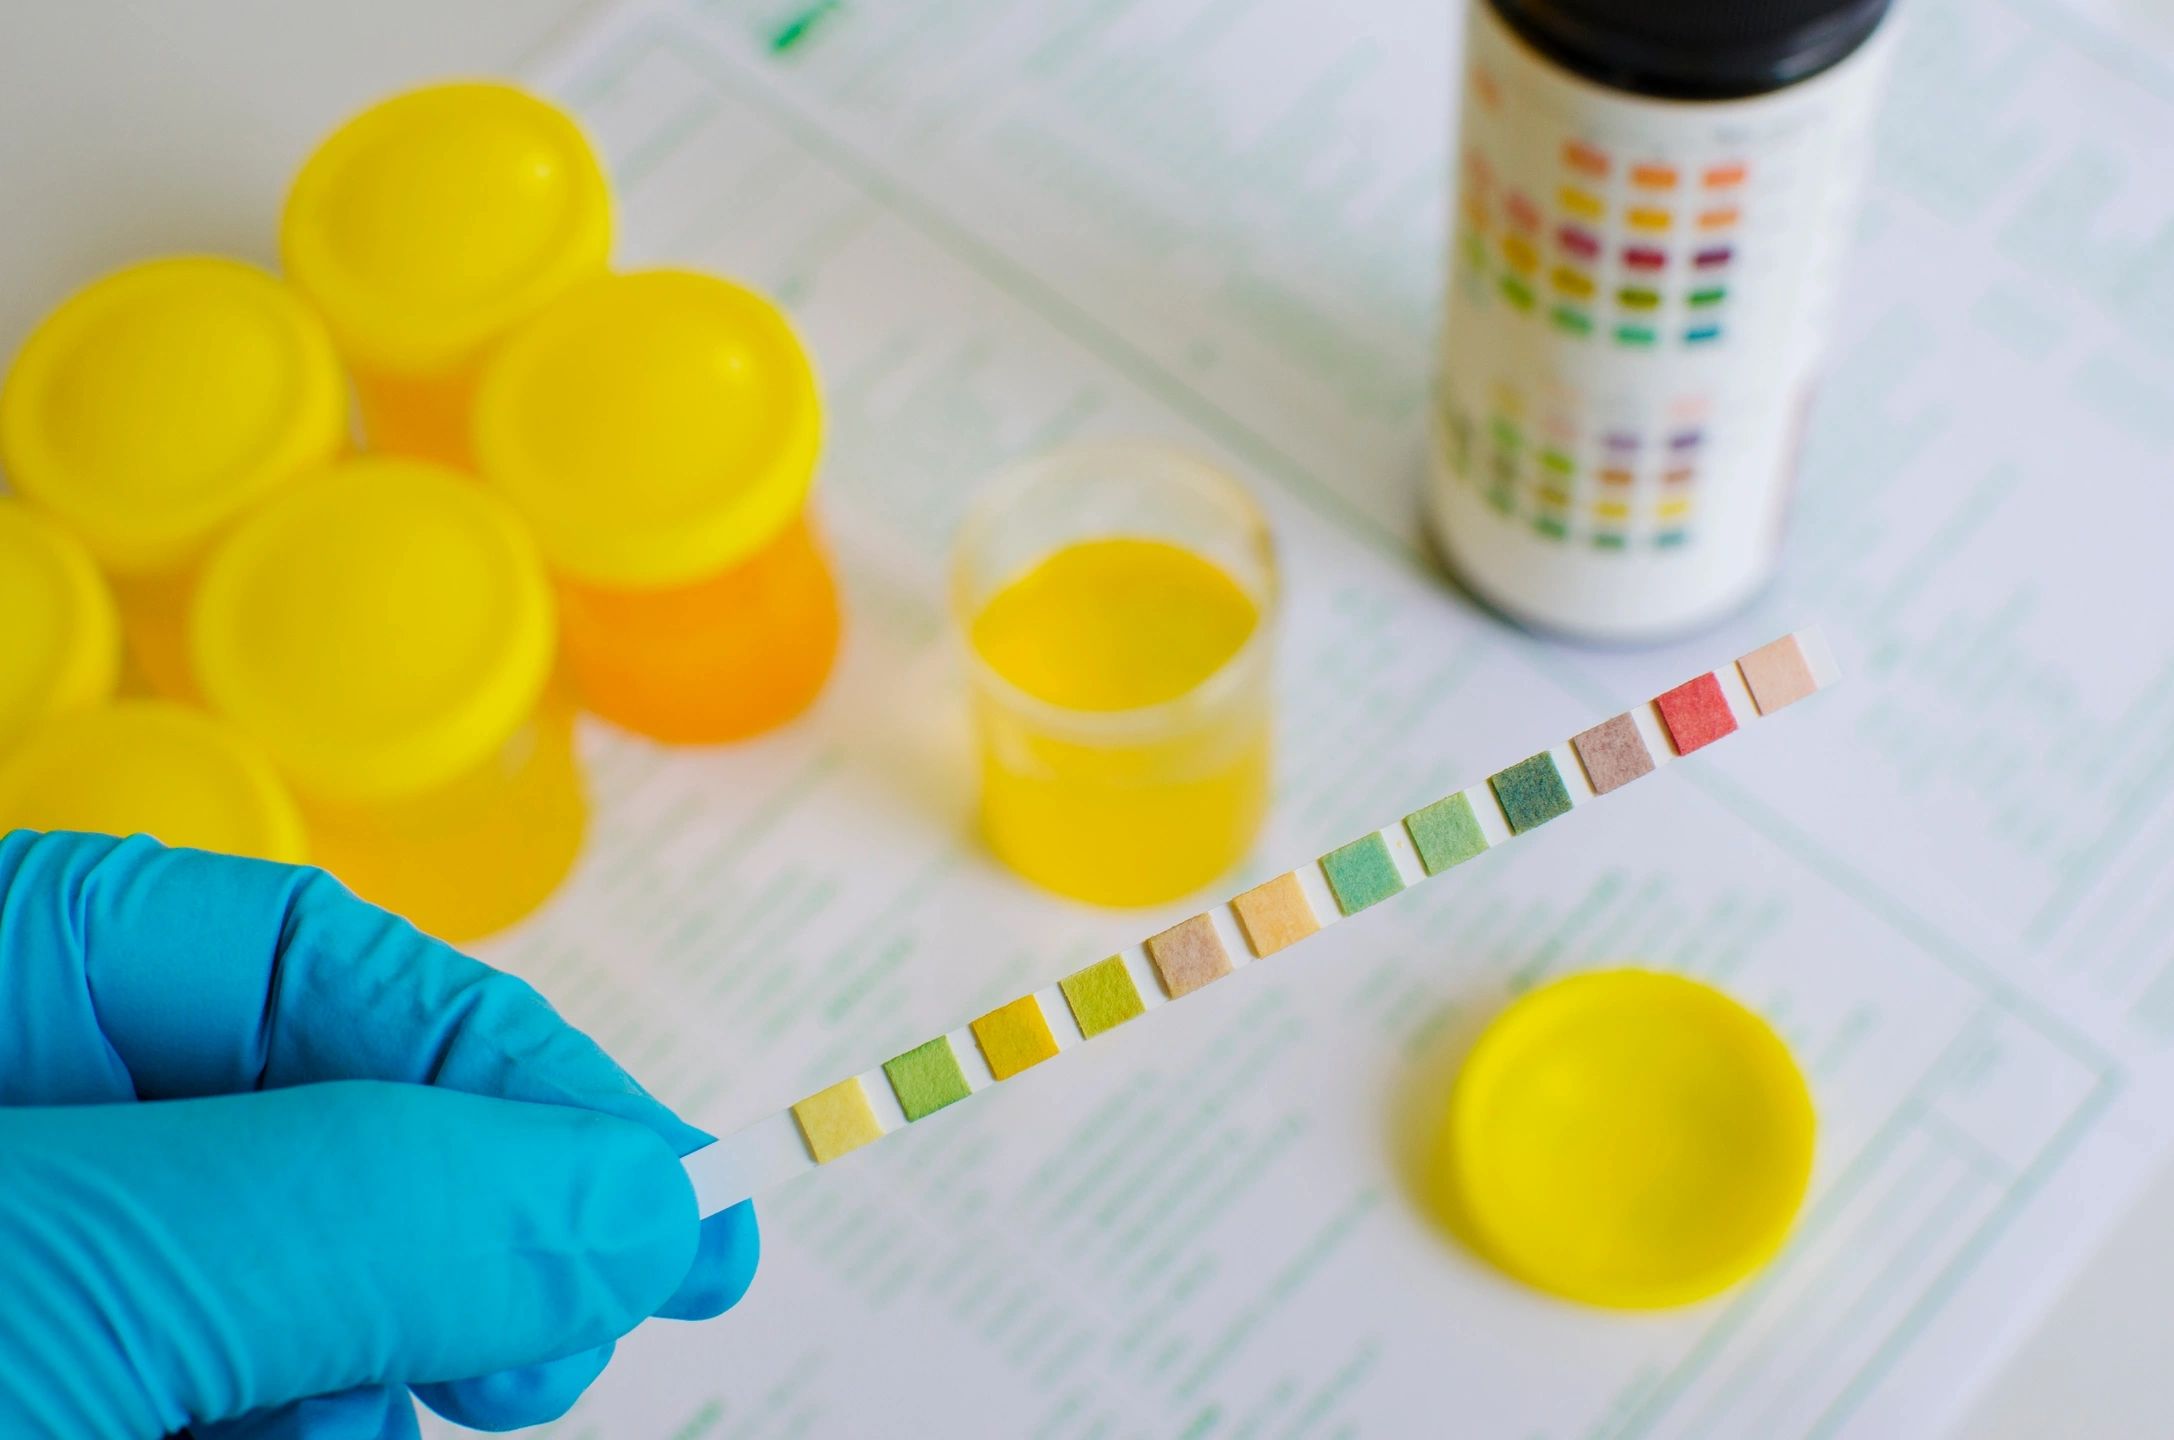 A close-up of a urine drug test kit with a sample container. This is a common method for drug screening and detection.